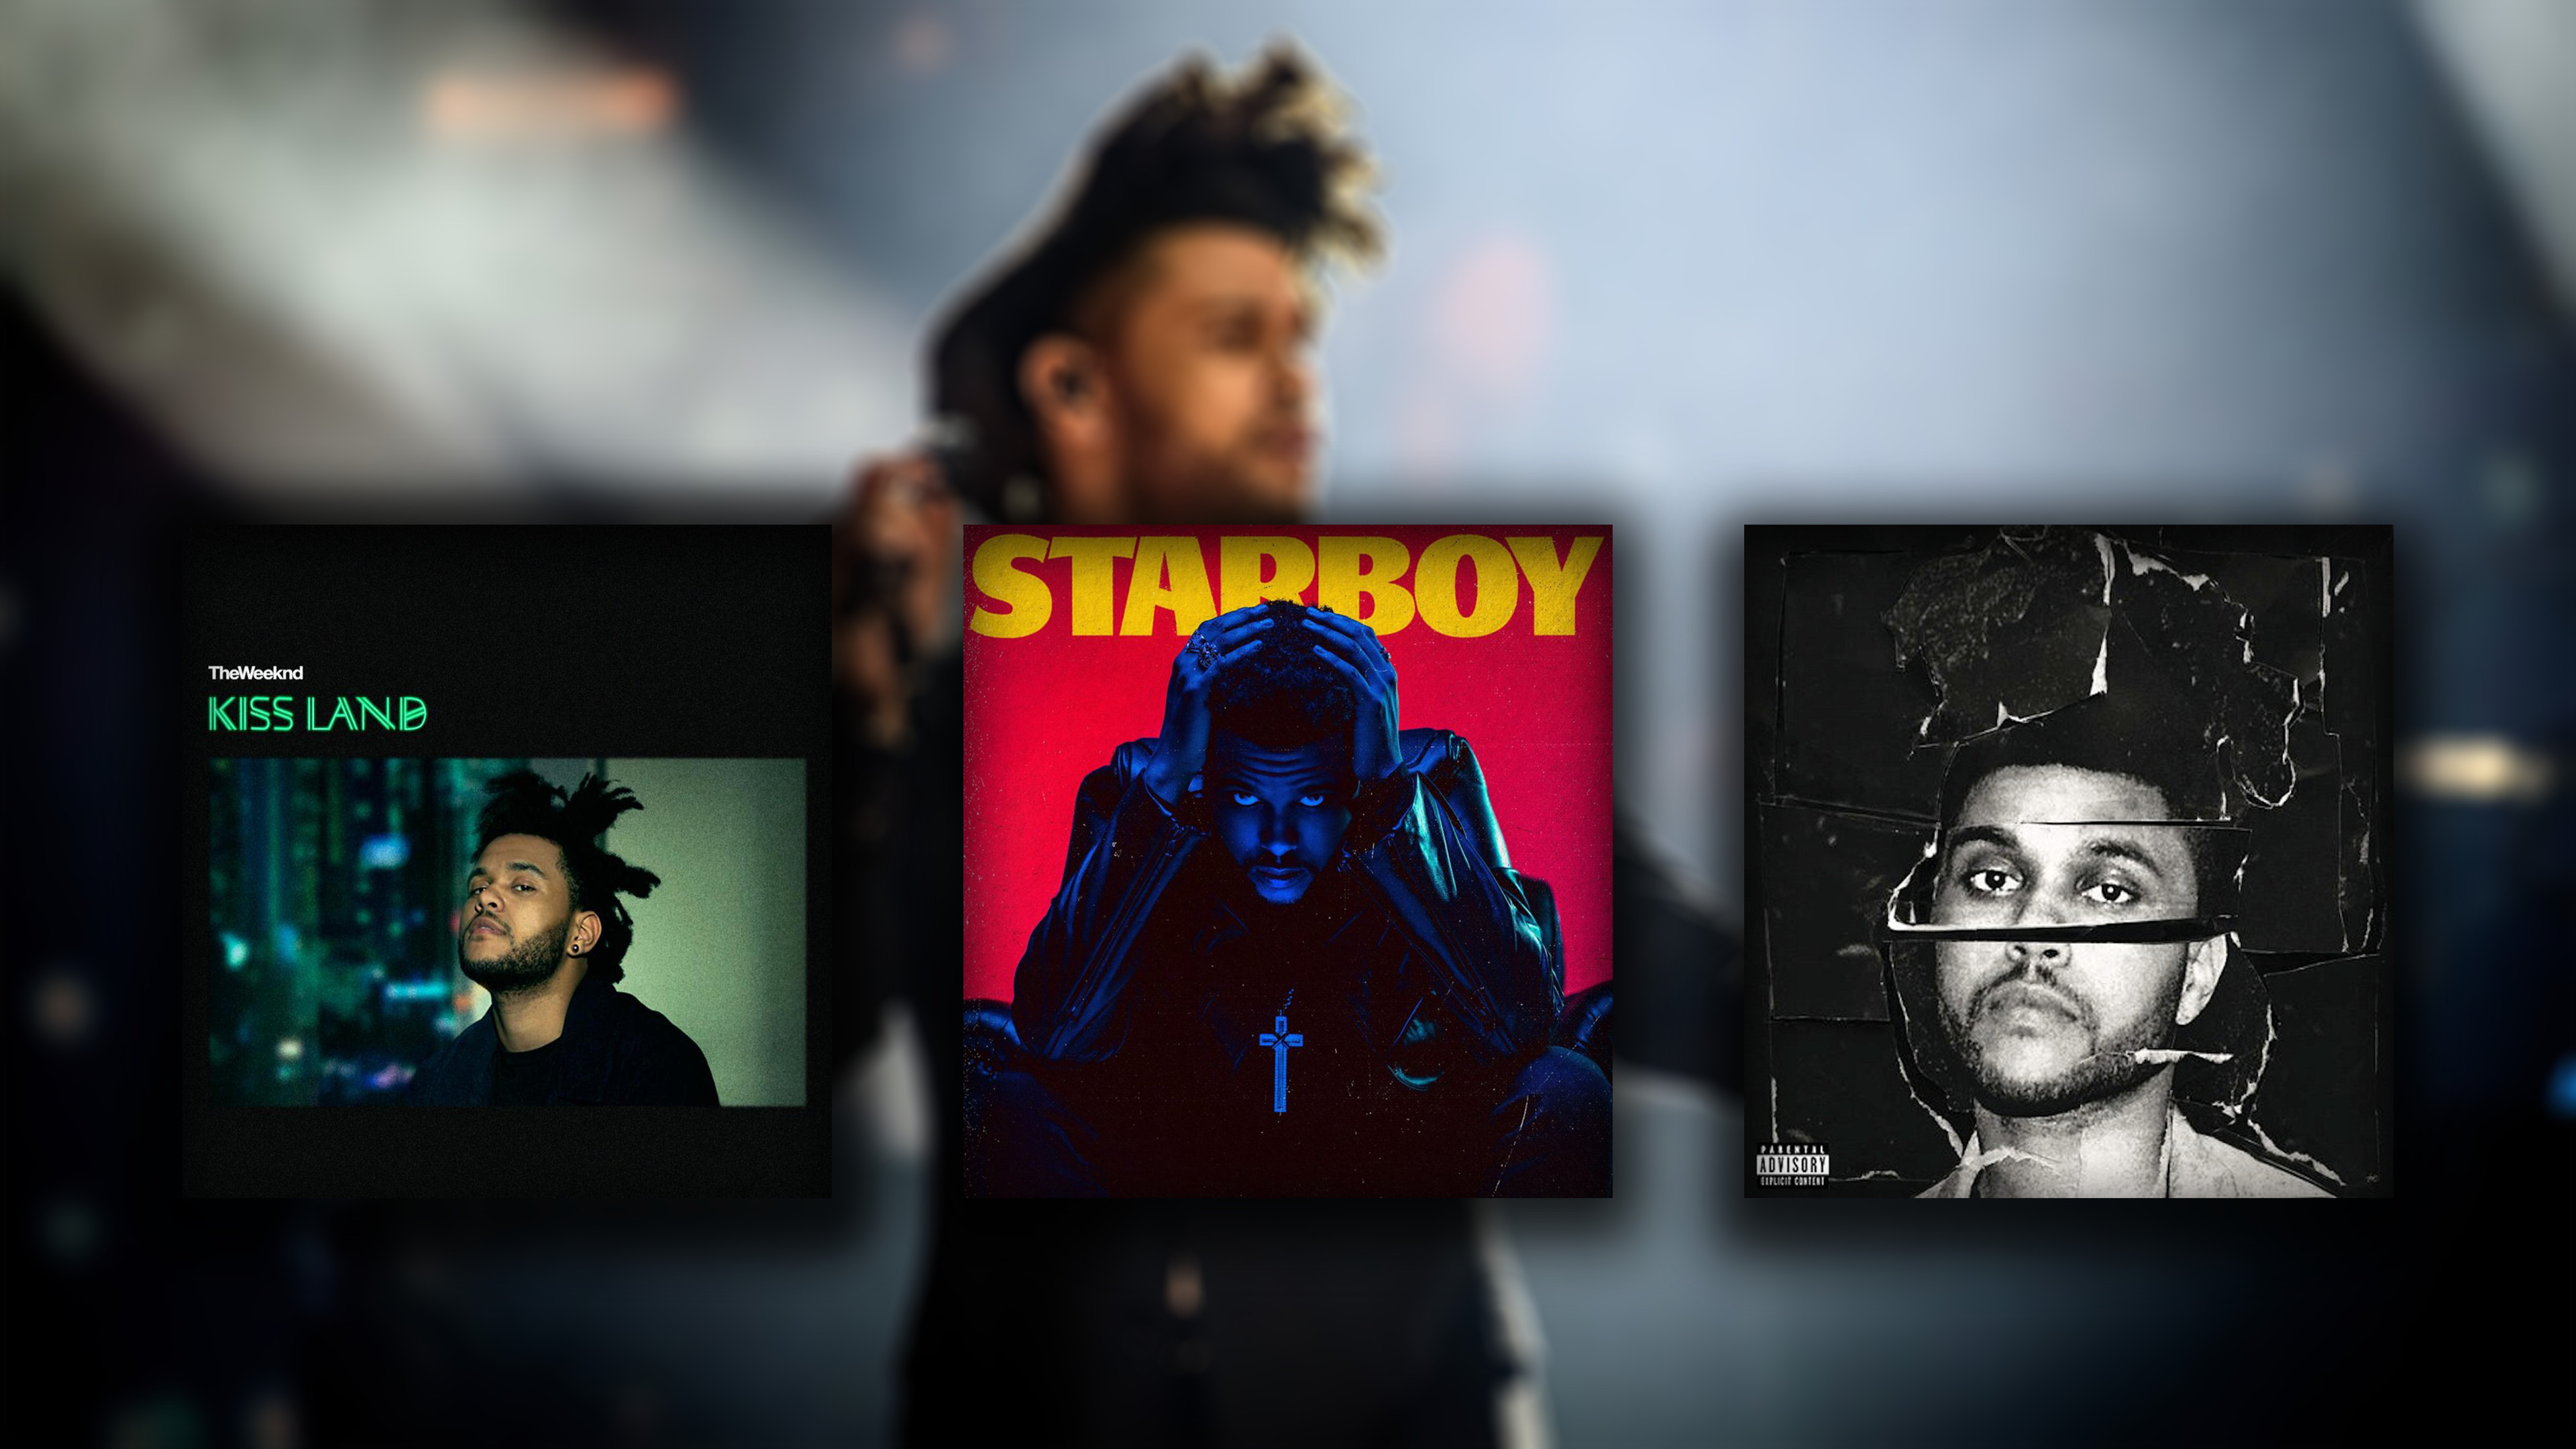 The Weeknd Wallpapers.